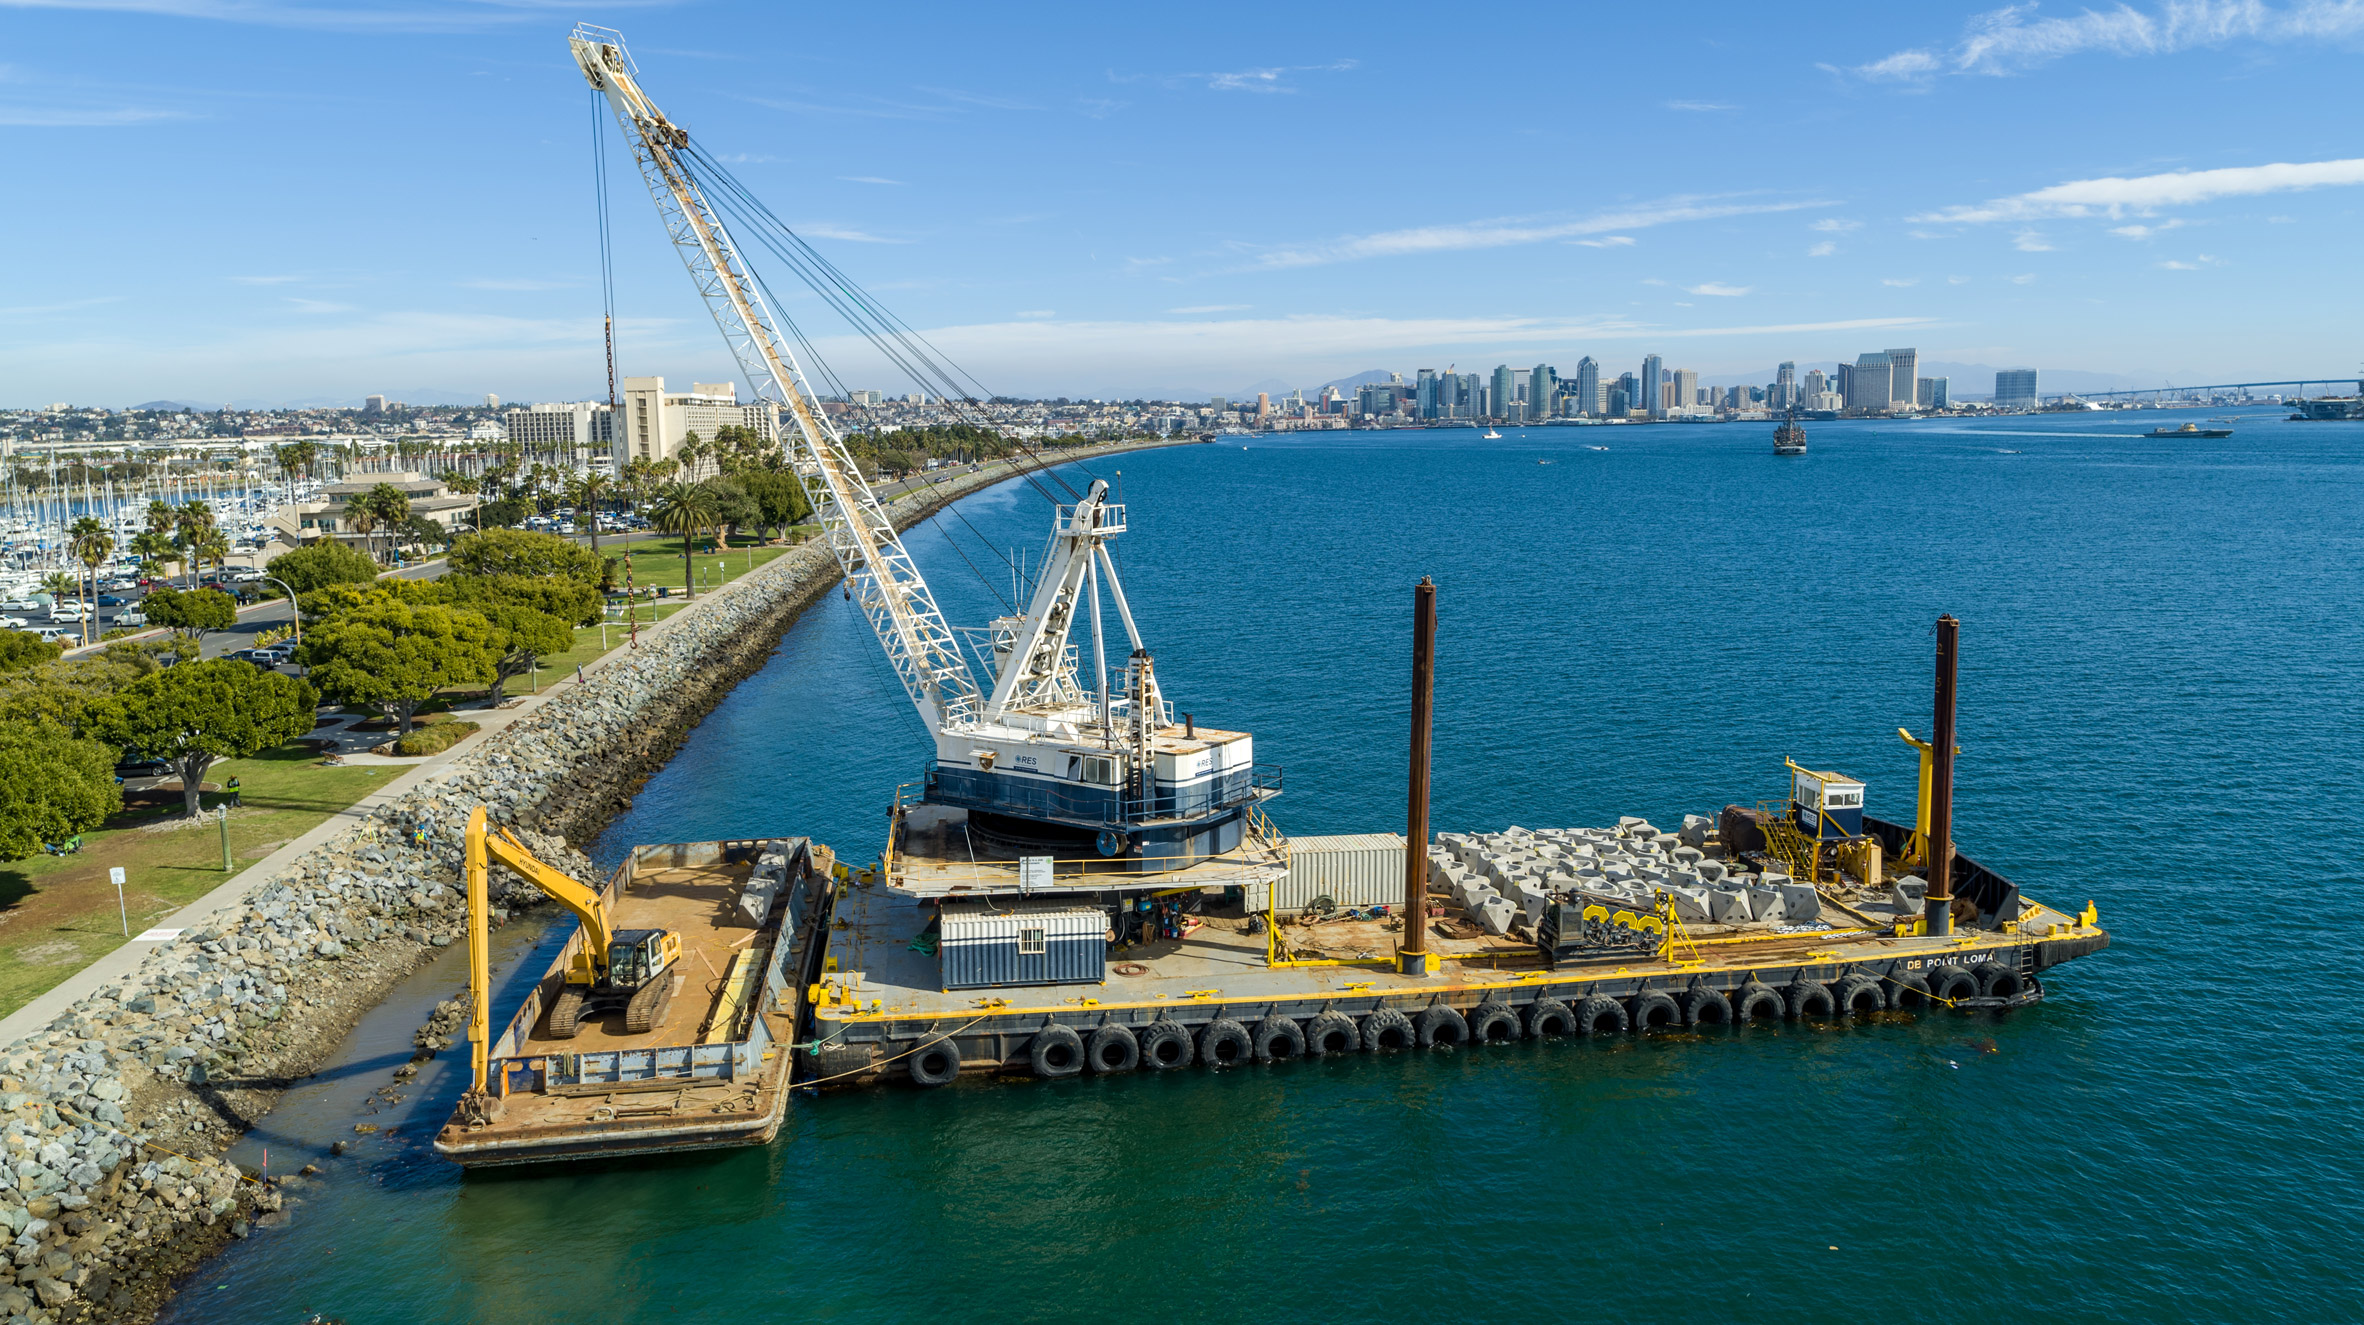 A barge in San Diego Bay carrying man-made rock pools